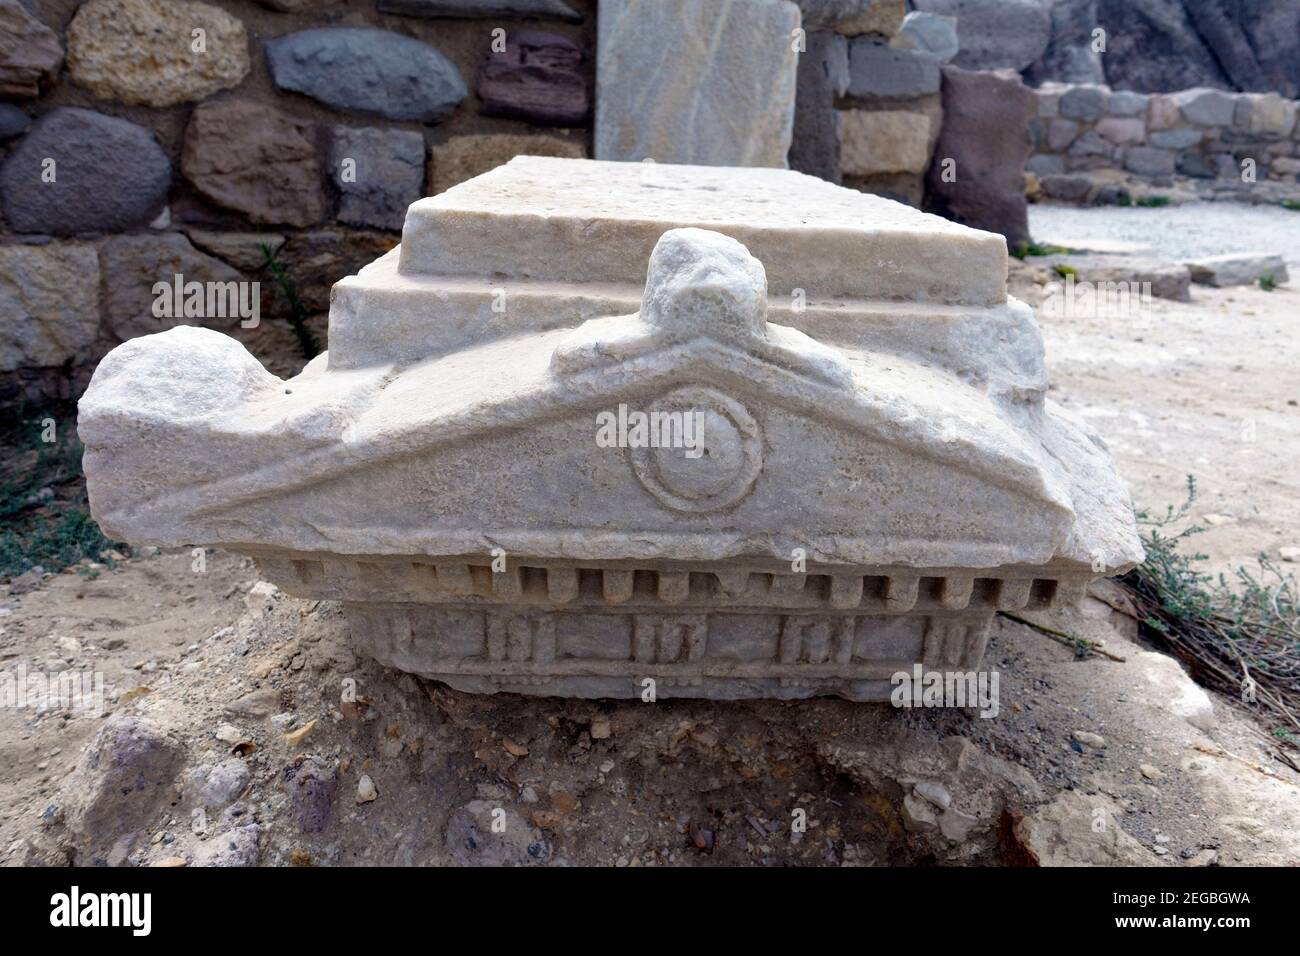 Intricate stone carvings lying in the ruined Basilica of Agios Stefanos in Kefalos, Kos, Greece Stock Photo